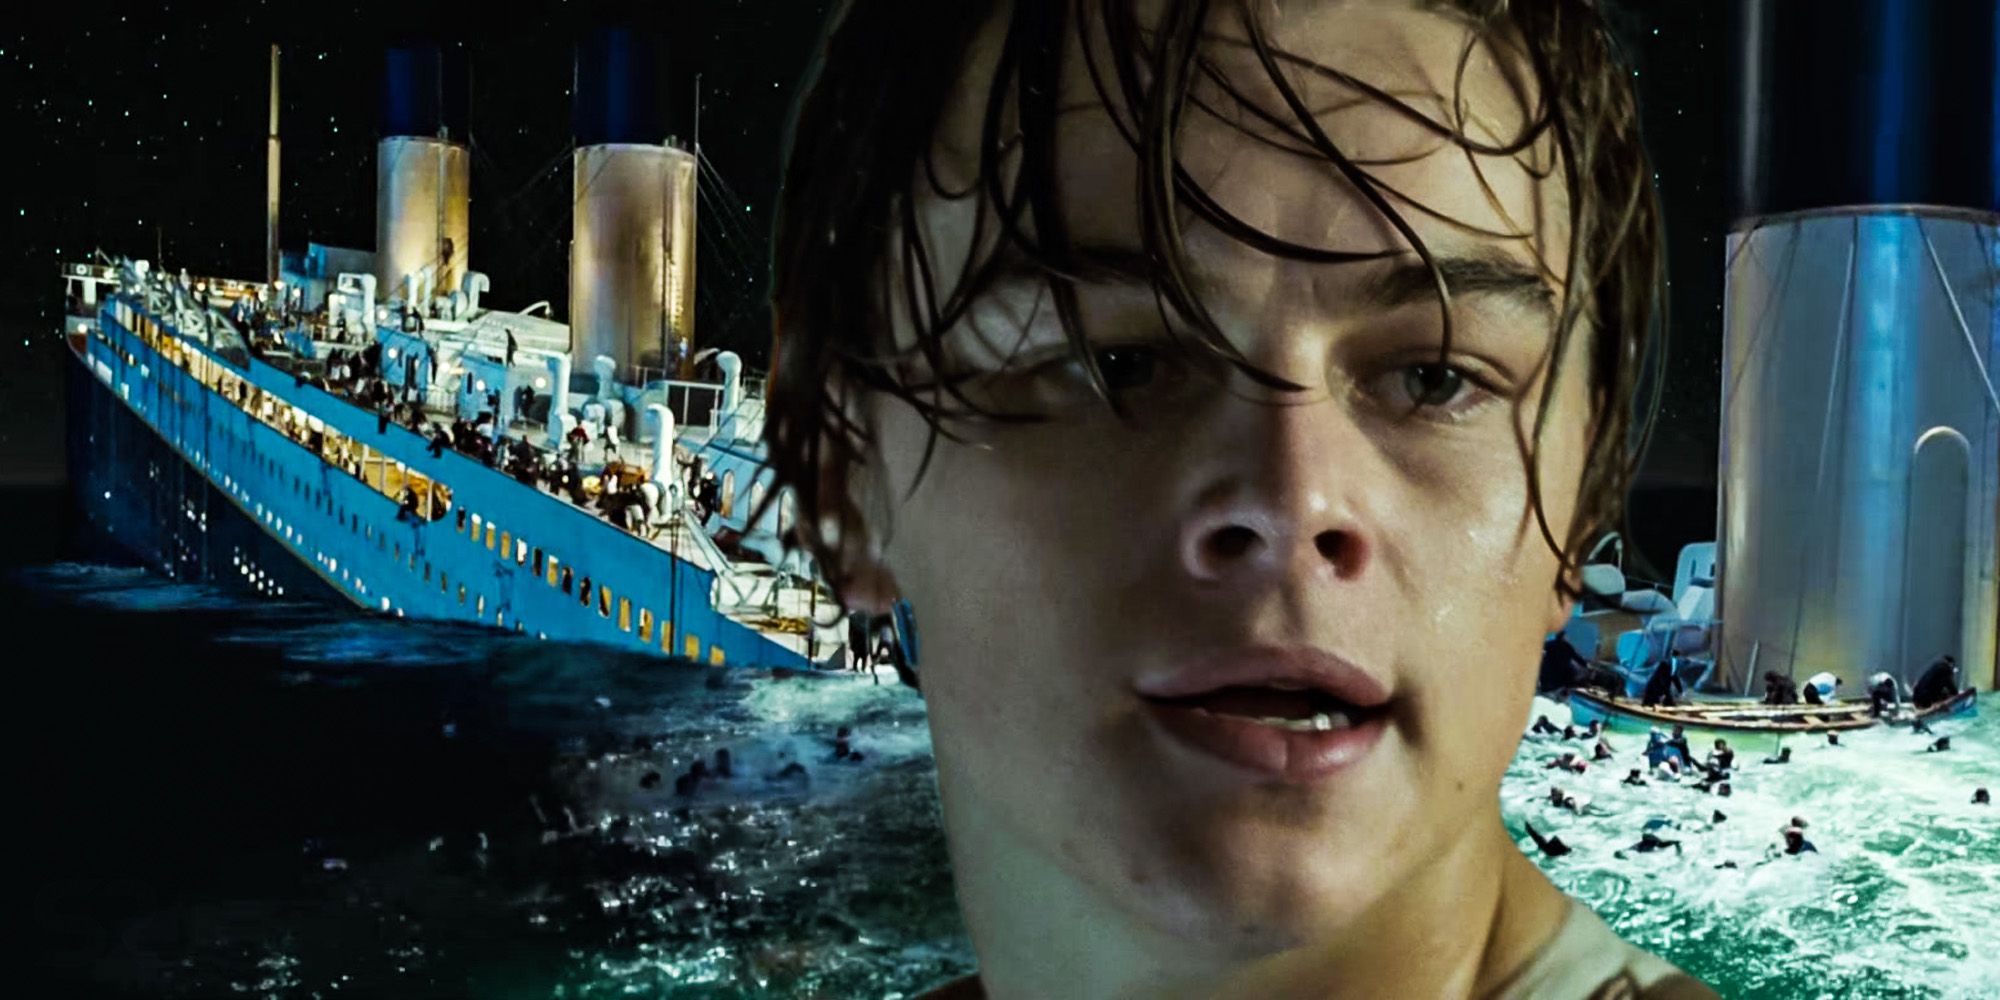 How Long The Titanic Takes To Sink In The Movie vs. Real Life